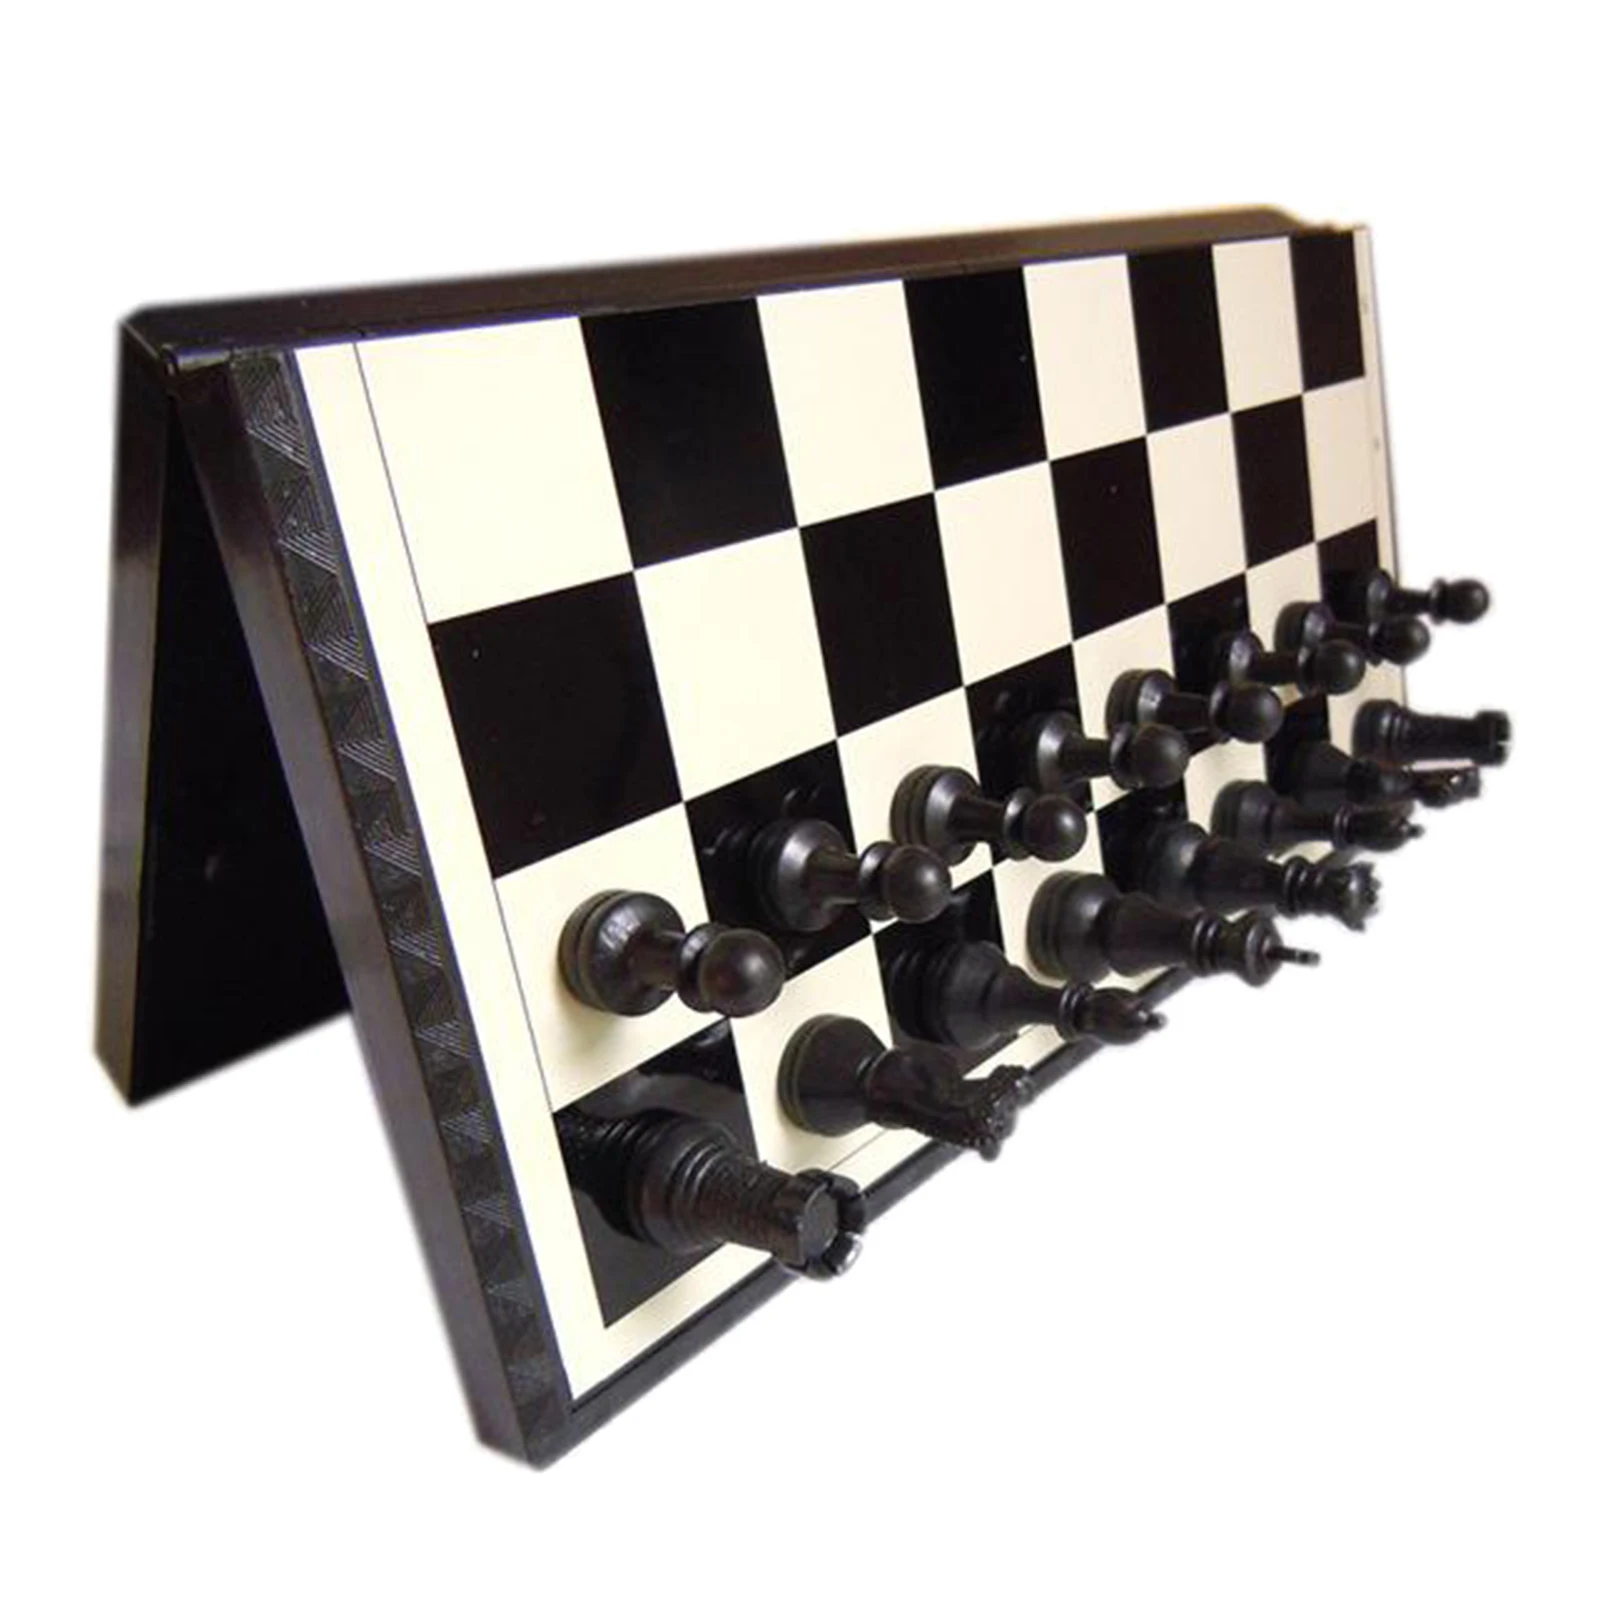 International Chess Magnetic Plastic Chessman & Folding Chessboard Board Game Portable Kid Travel Game Toy